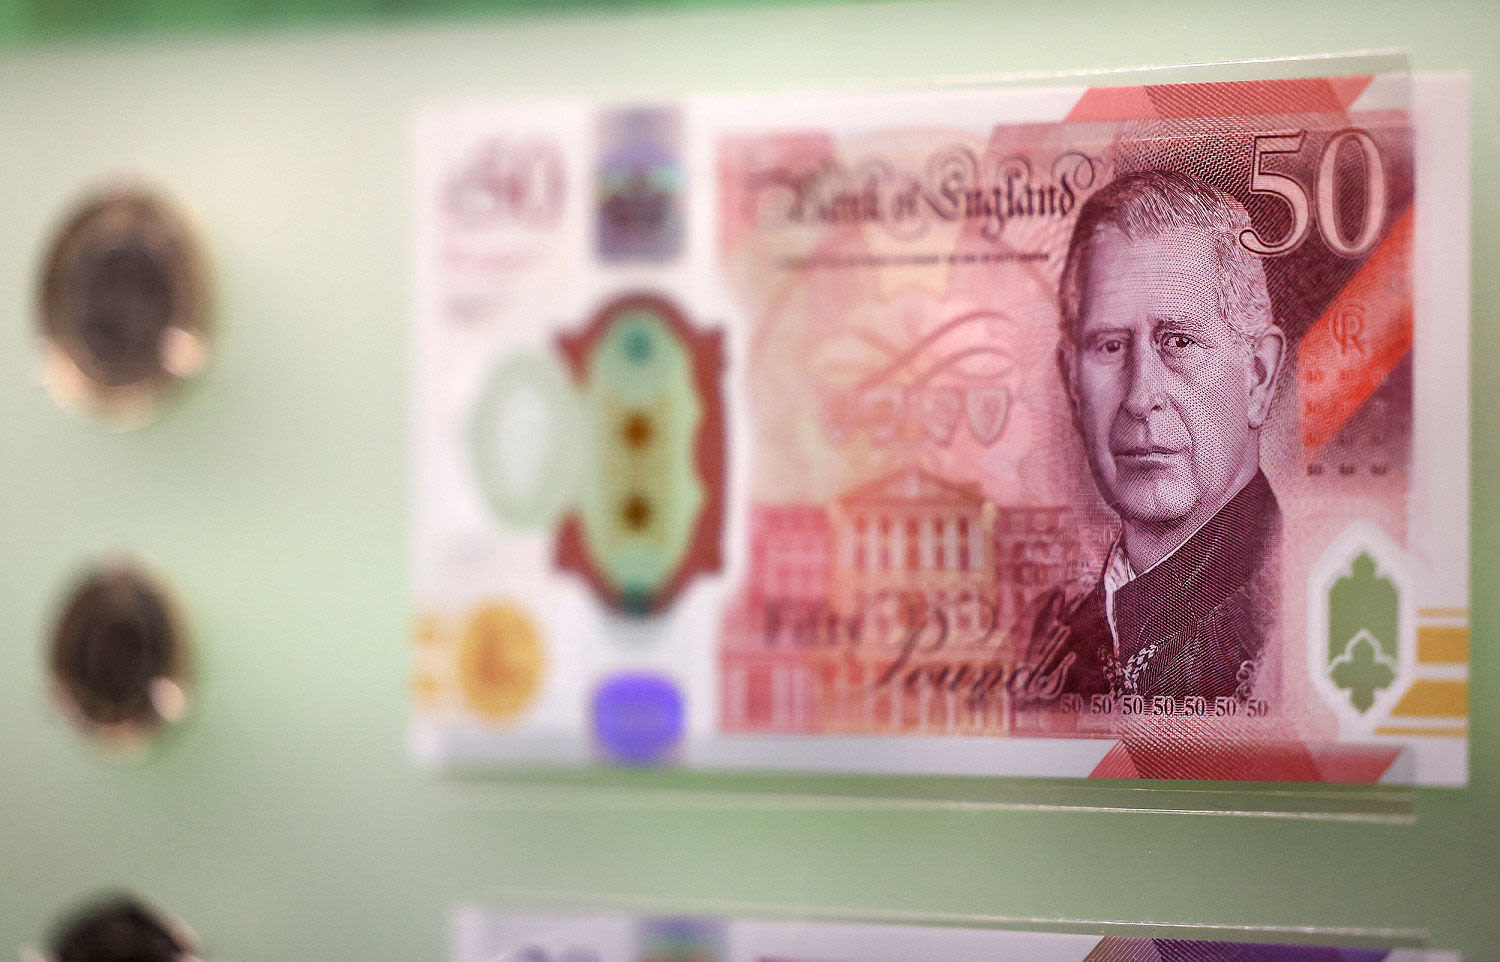 King Charles III banknotes enter circulation for the first time